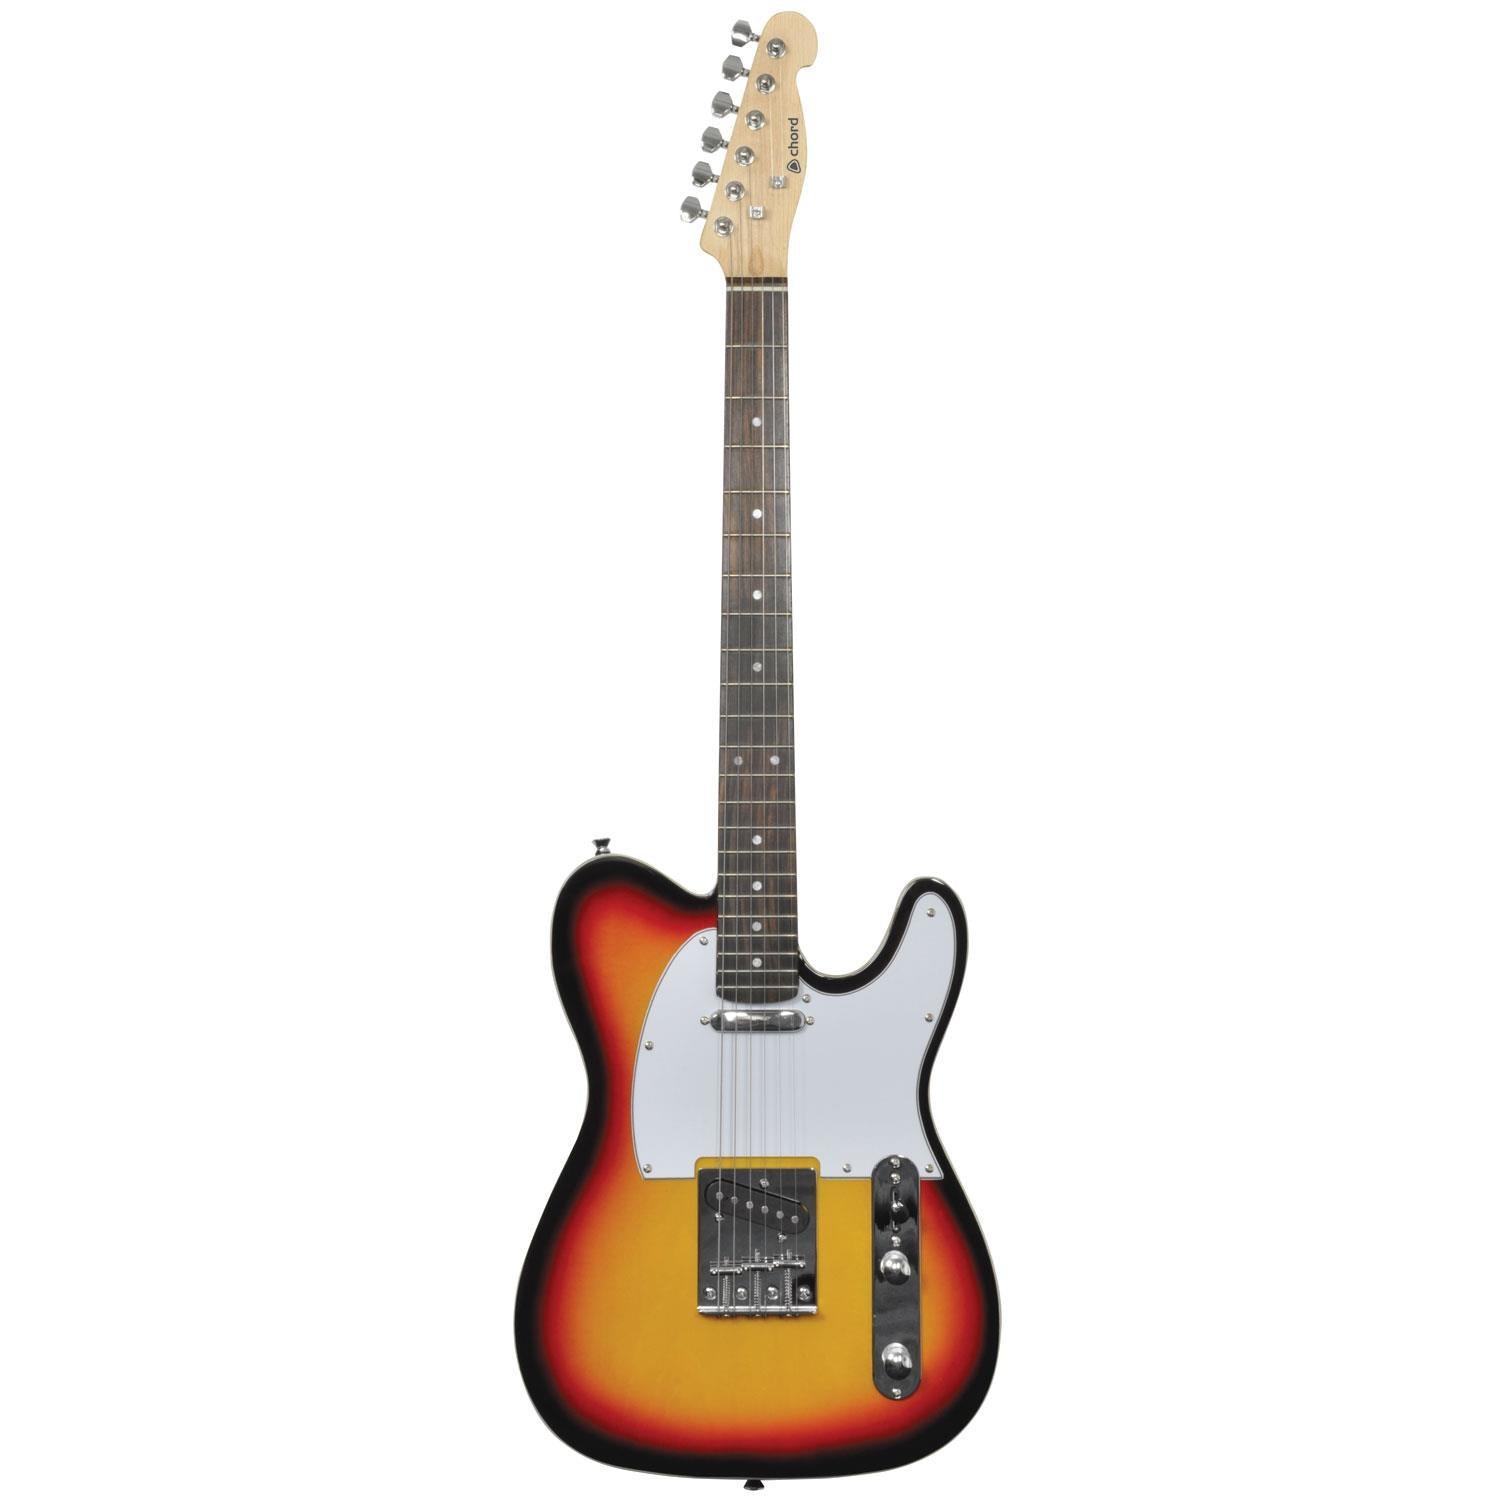 Chord CAL62 3 Tone Starburst Electric Guitar - DY Pro Audio